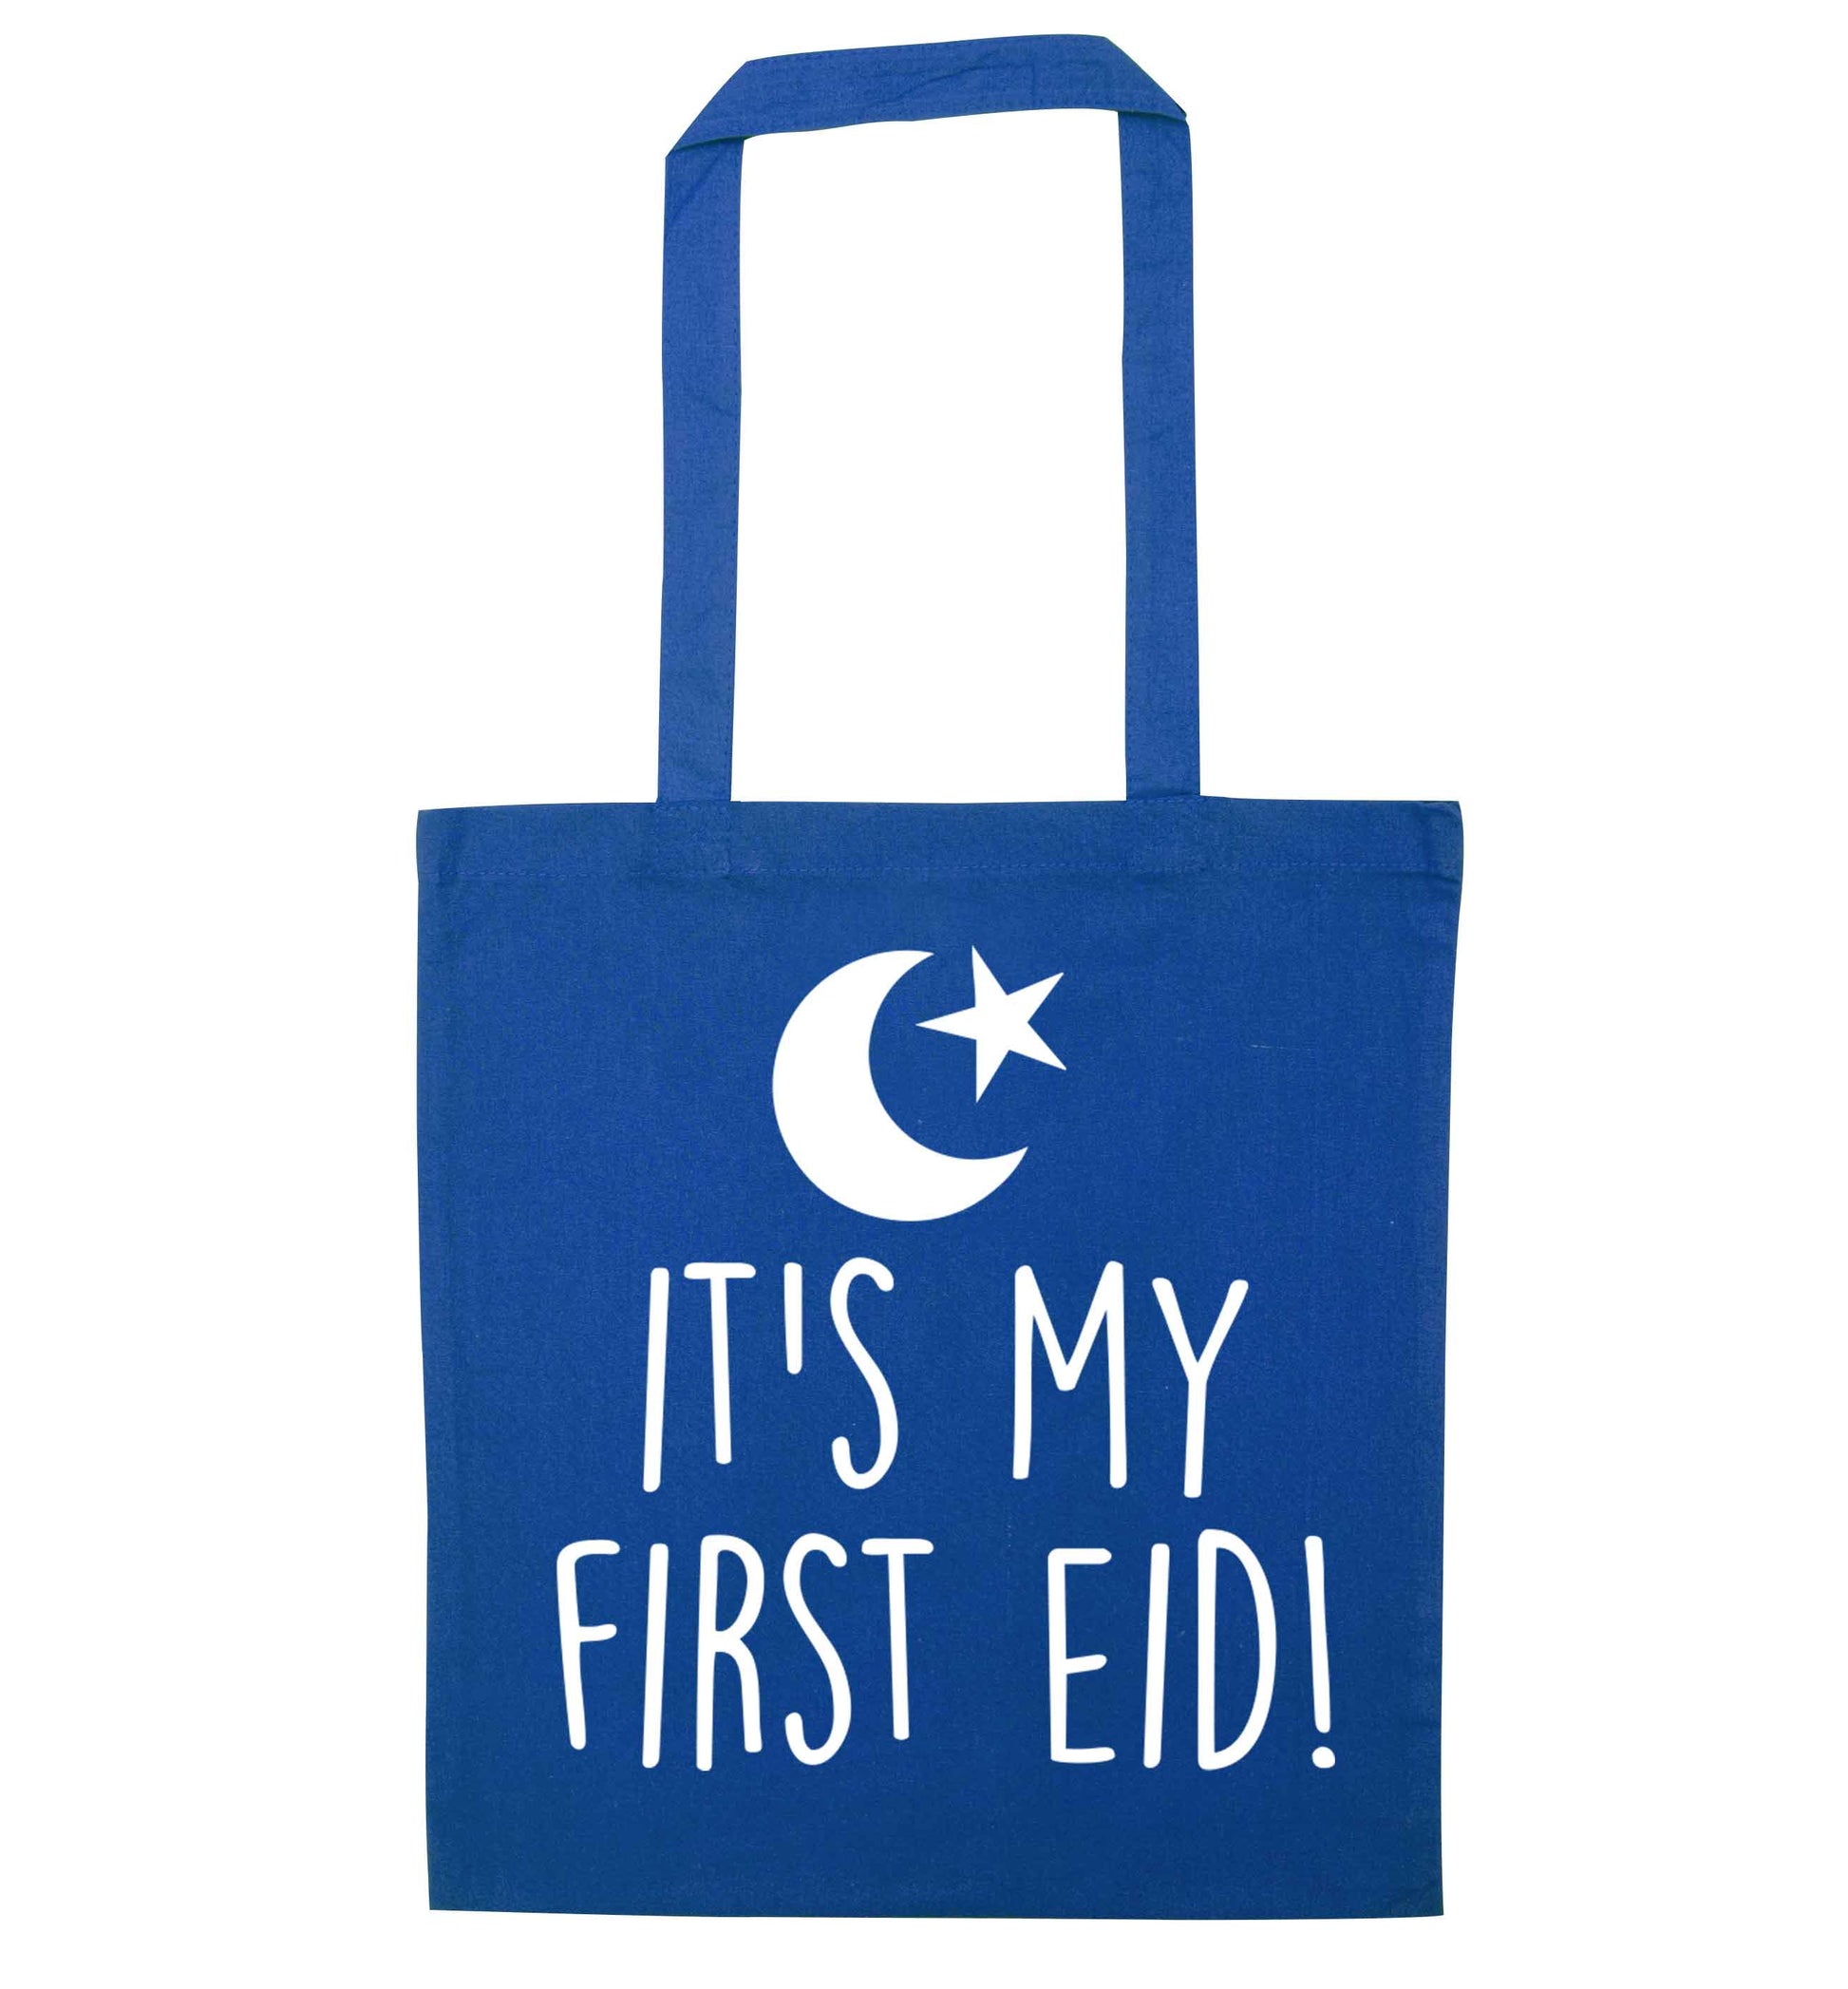 It's my first Eid blue tote bag